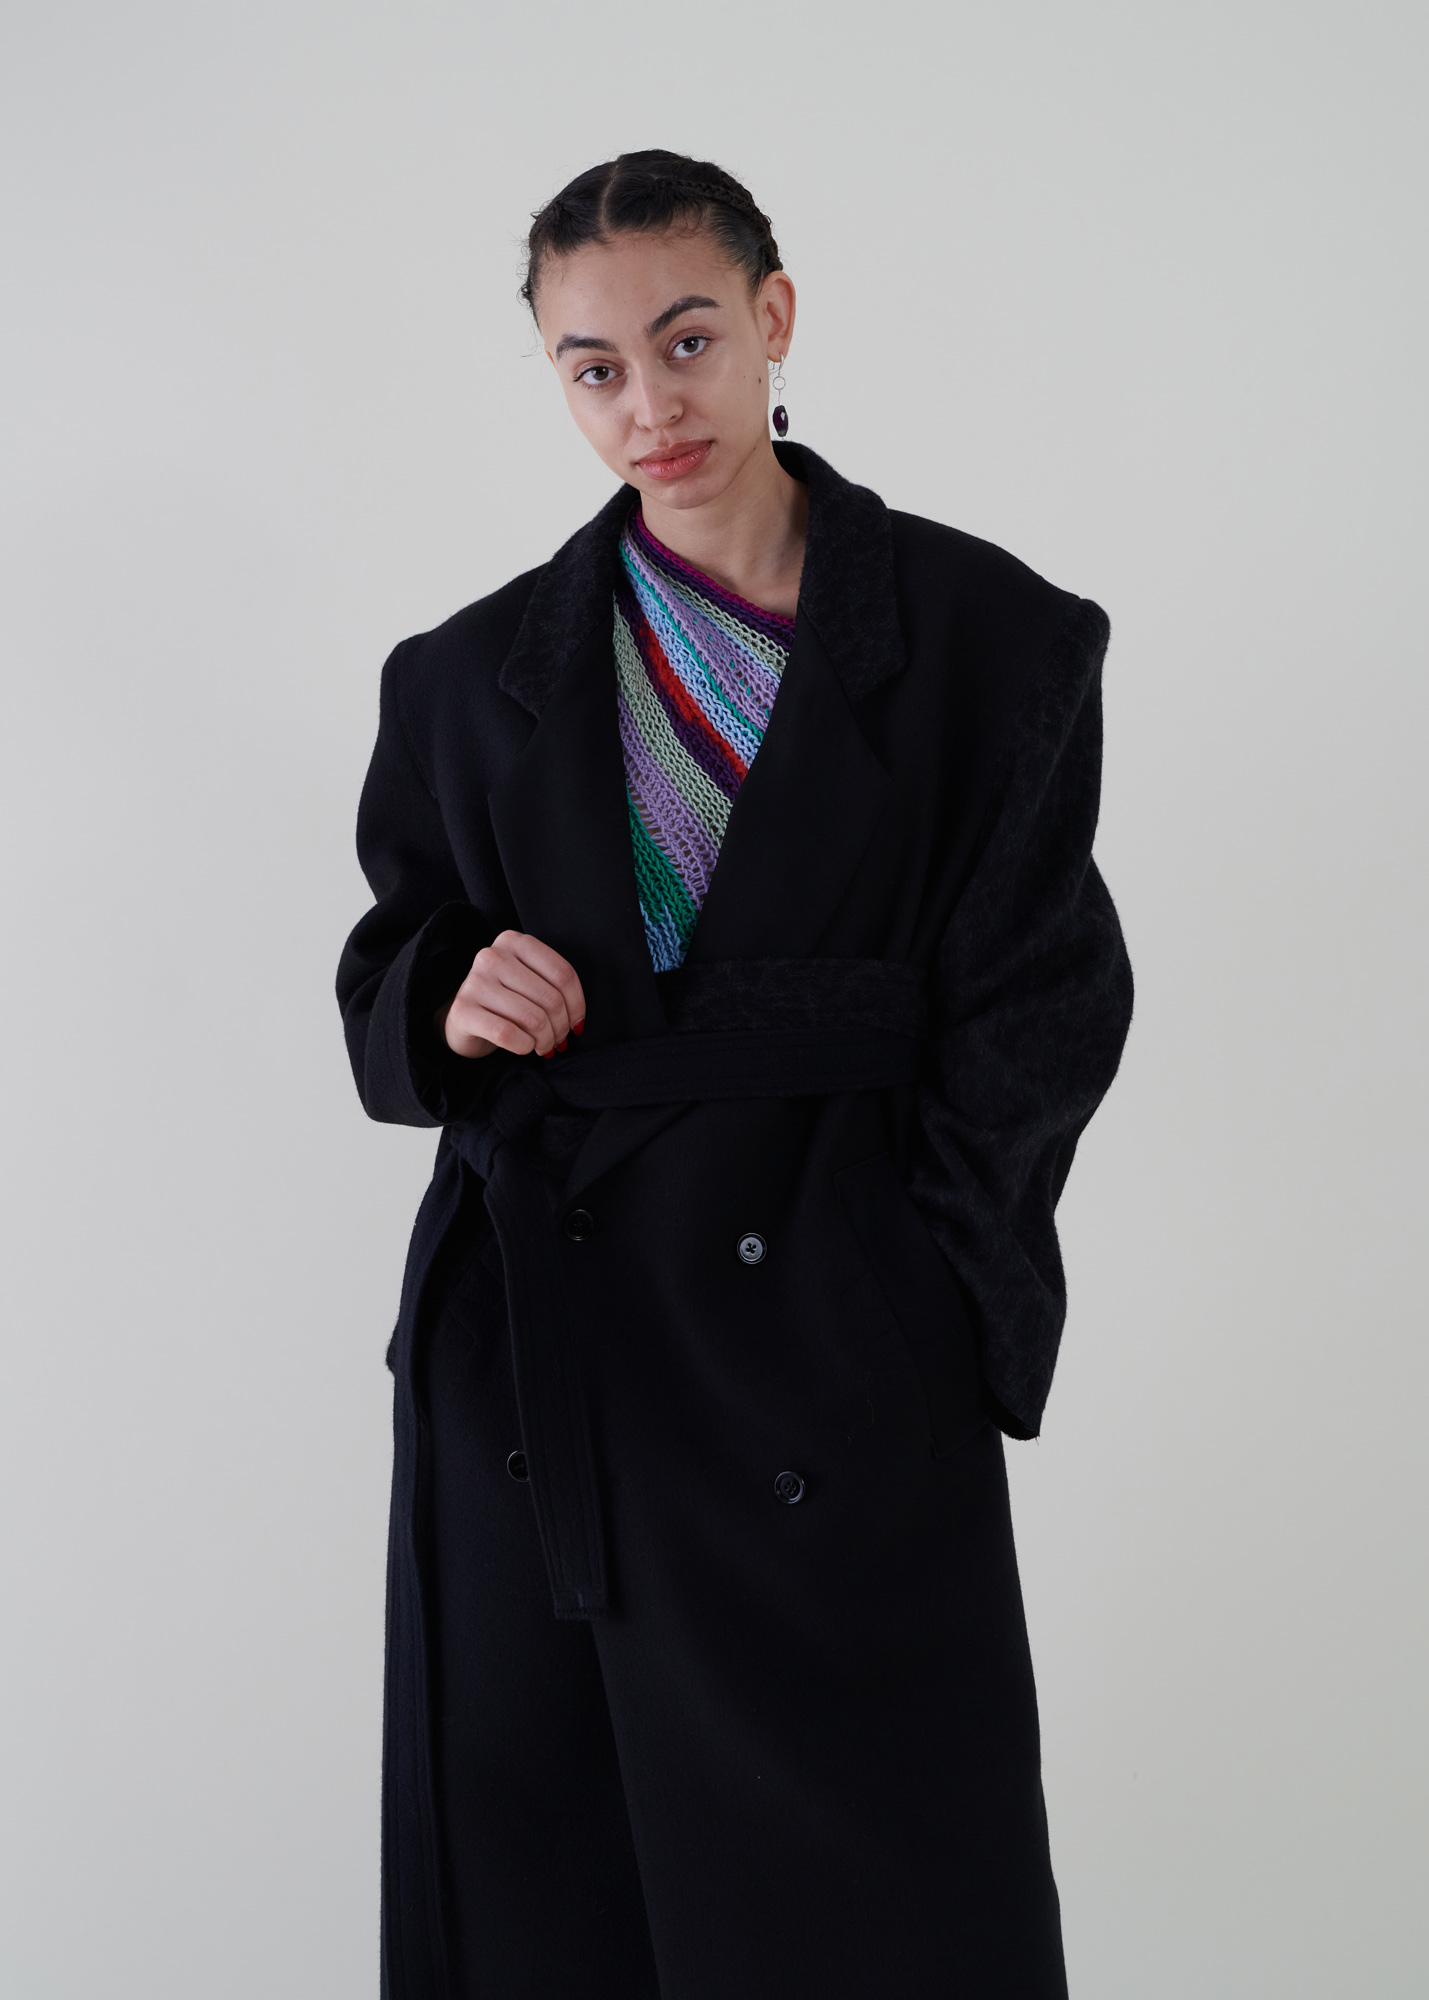 Sustainable fashion with upcycled wool tailored coat from Aldwin Teva William